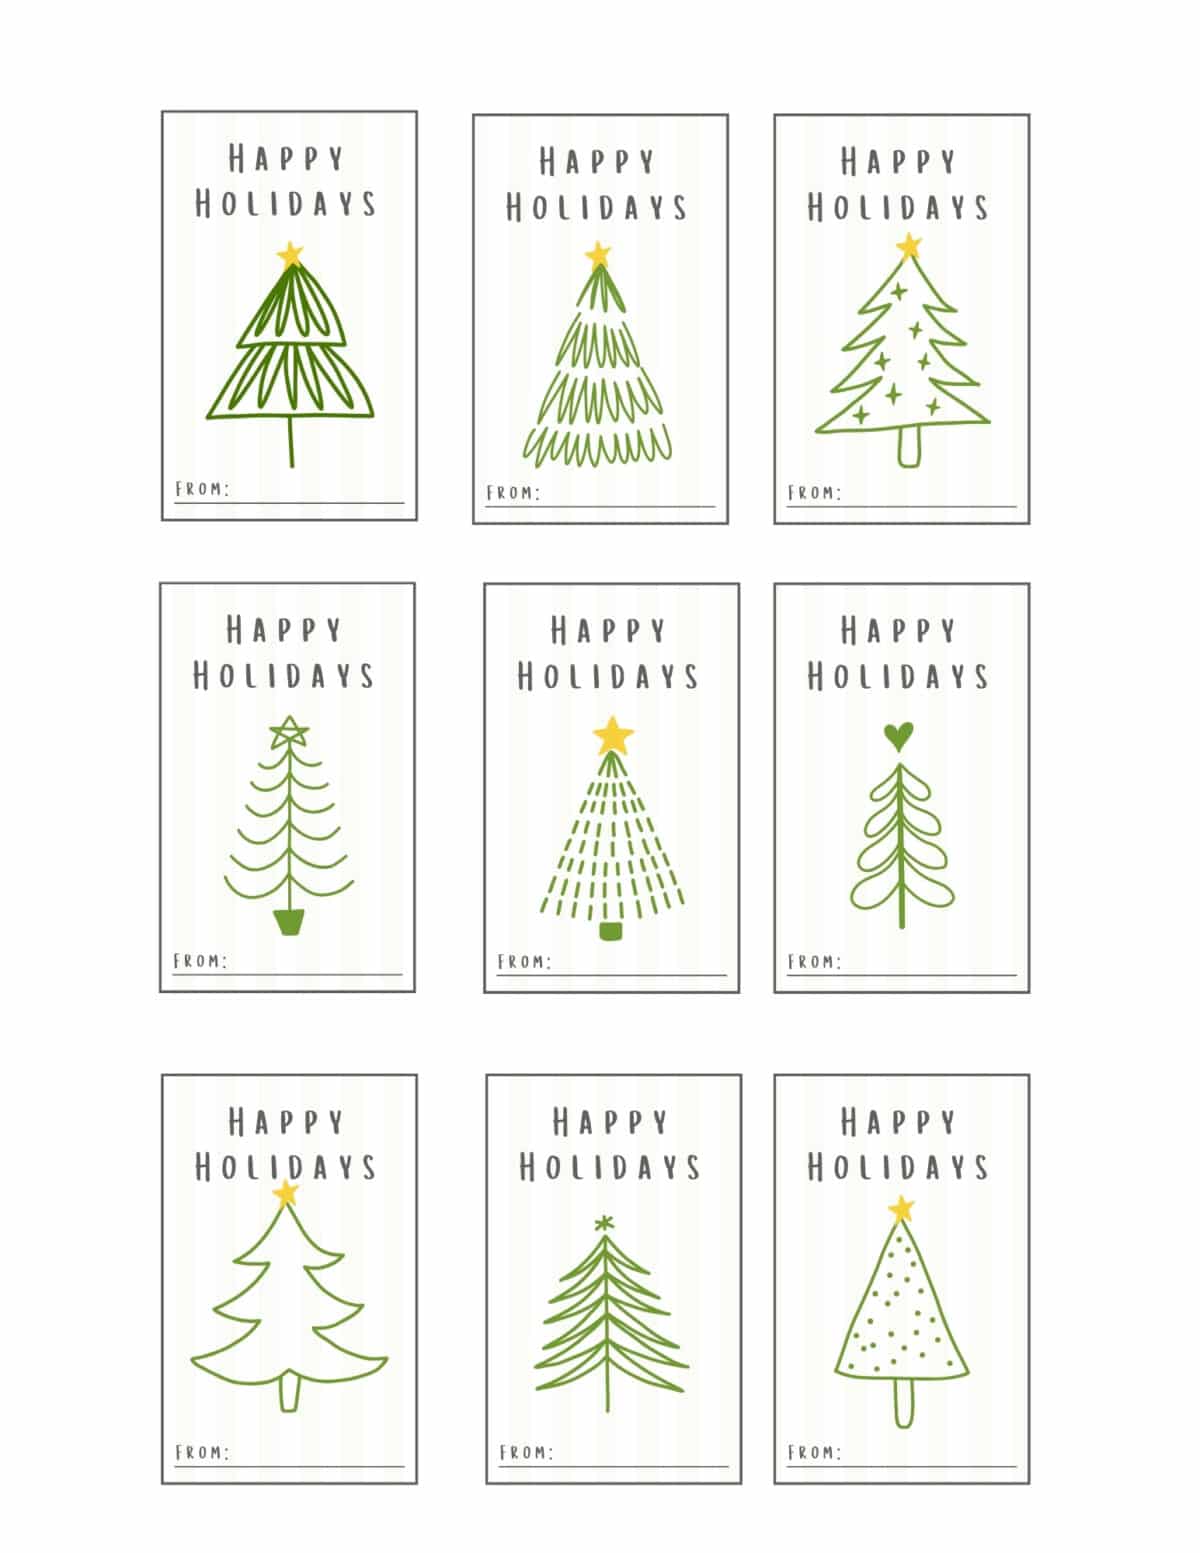 Printable gifting tags with a christmas tree design that says happy holidays.